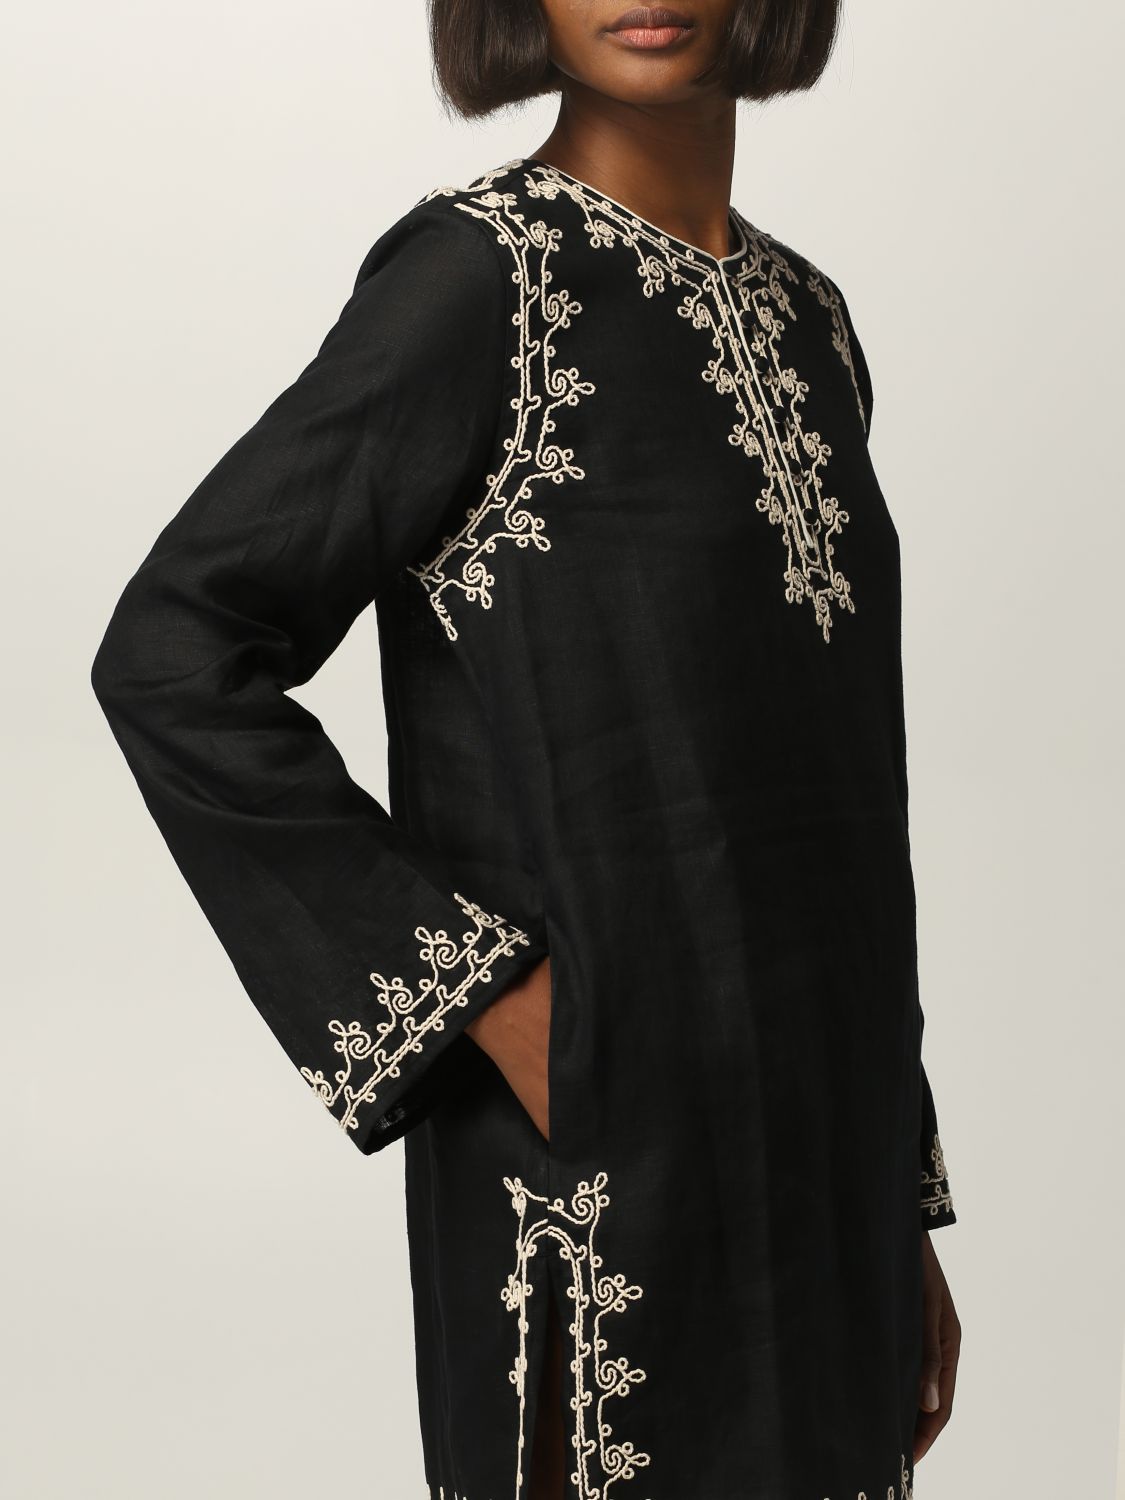 Dress Tory Burch: Tory Burch linen caftan with embroidery black 4